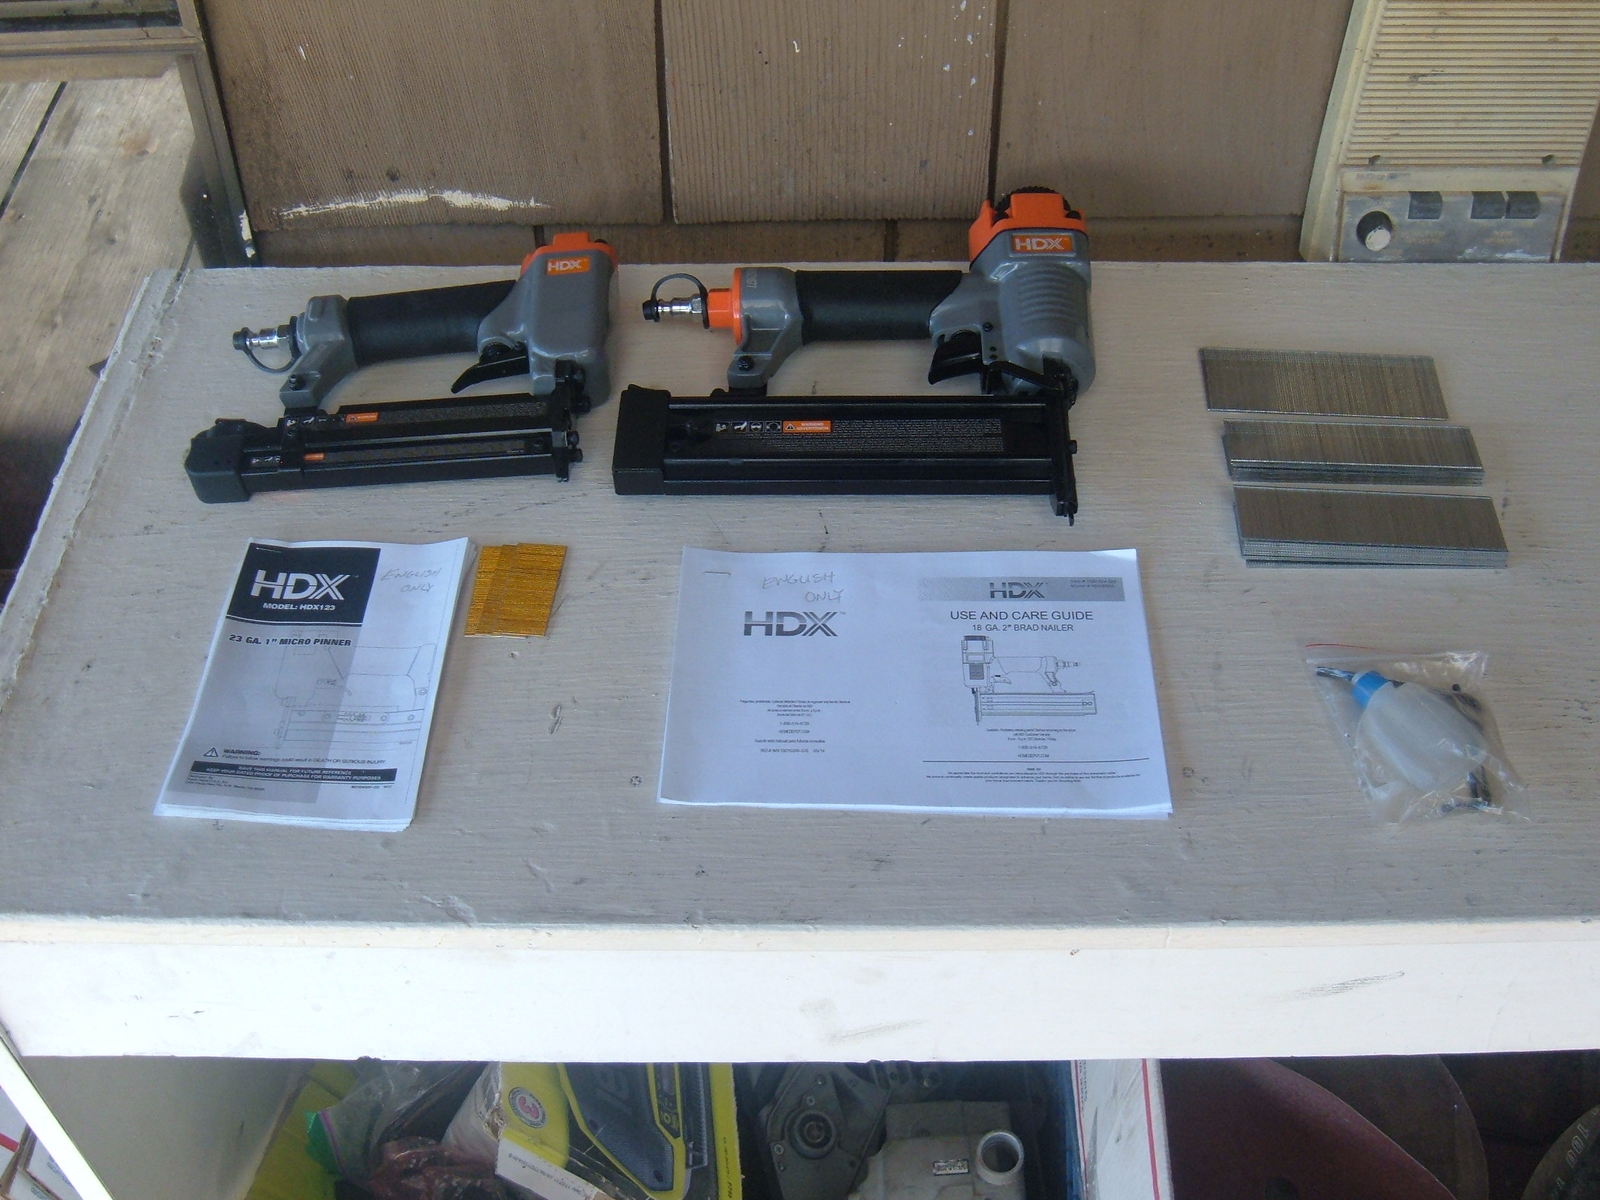 HDX123 micro pinner & HDXBR50 18ga. brad nailer with fasteners. New from a kit. - $72.00